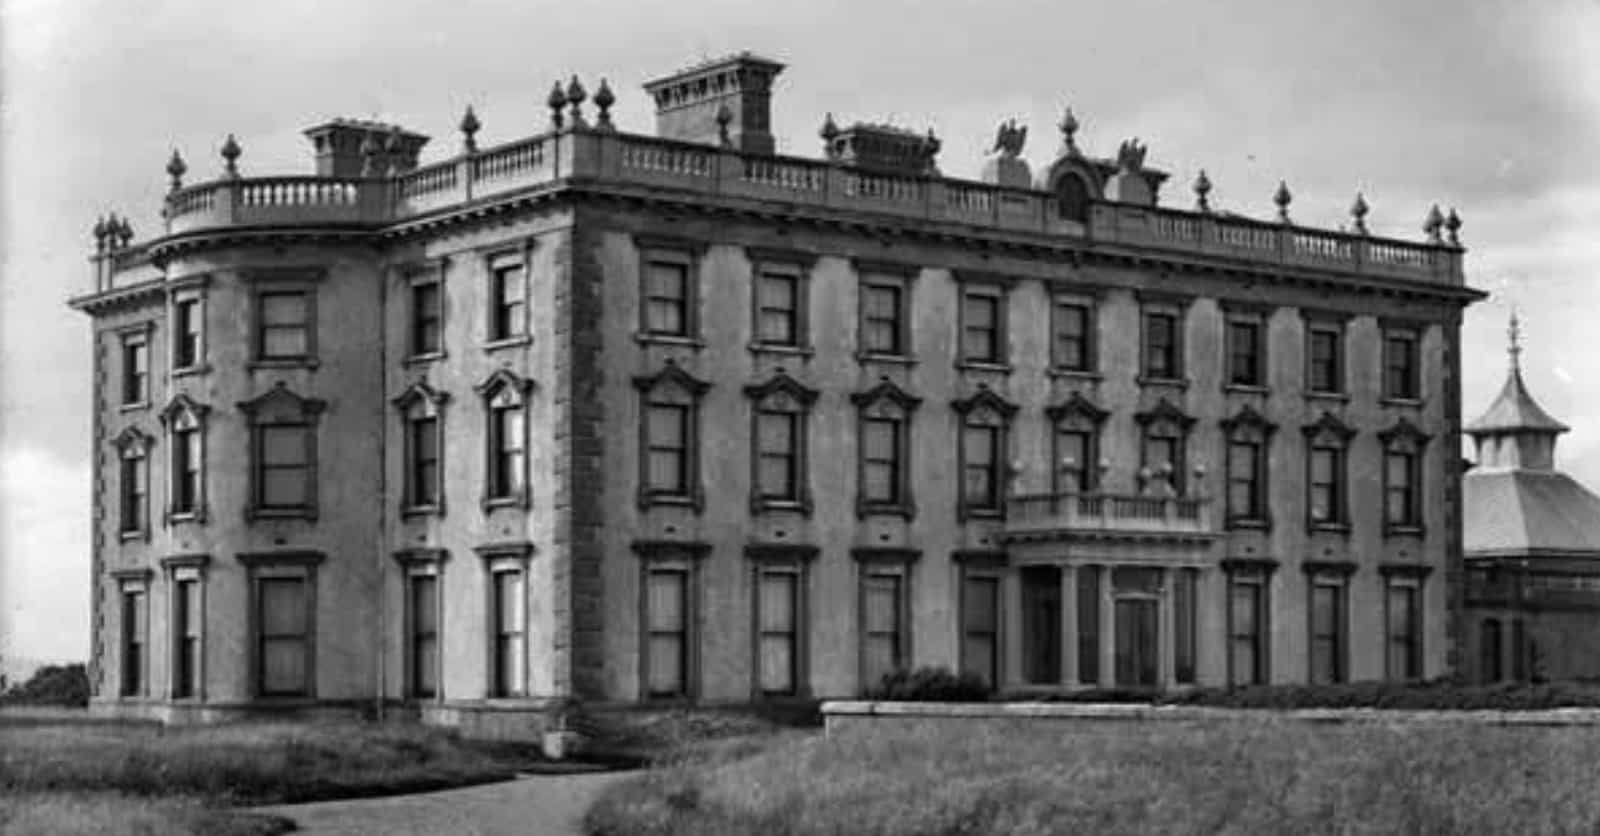 Ireland's Most Haunted House Hides The Tale Of A Young Girl Who Fell In Love With The Devil